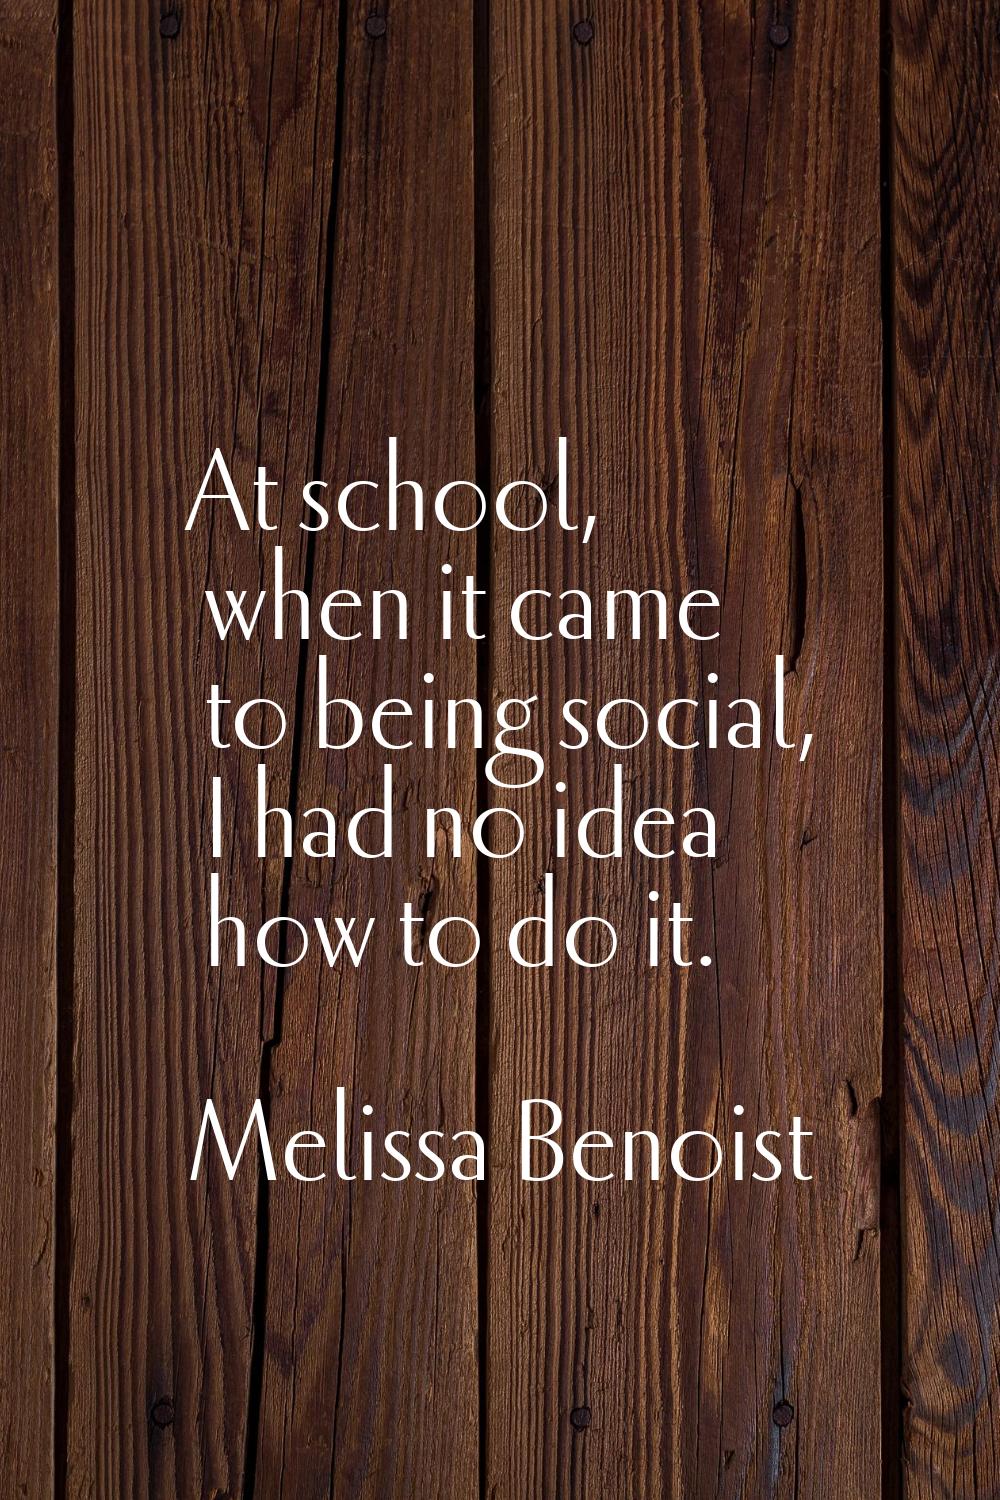 At school, when it came to being social, I had no idea how to do it.